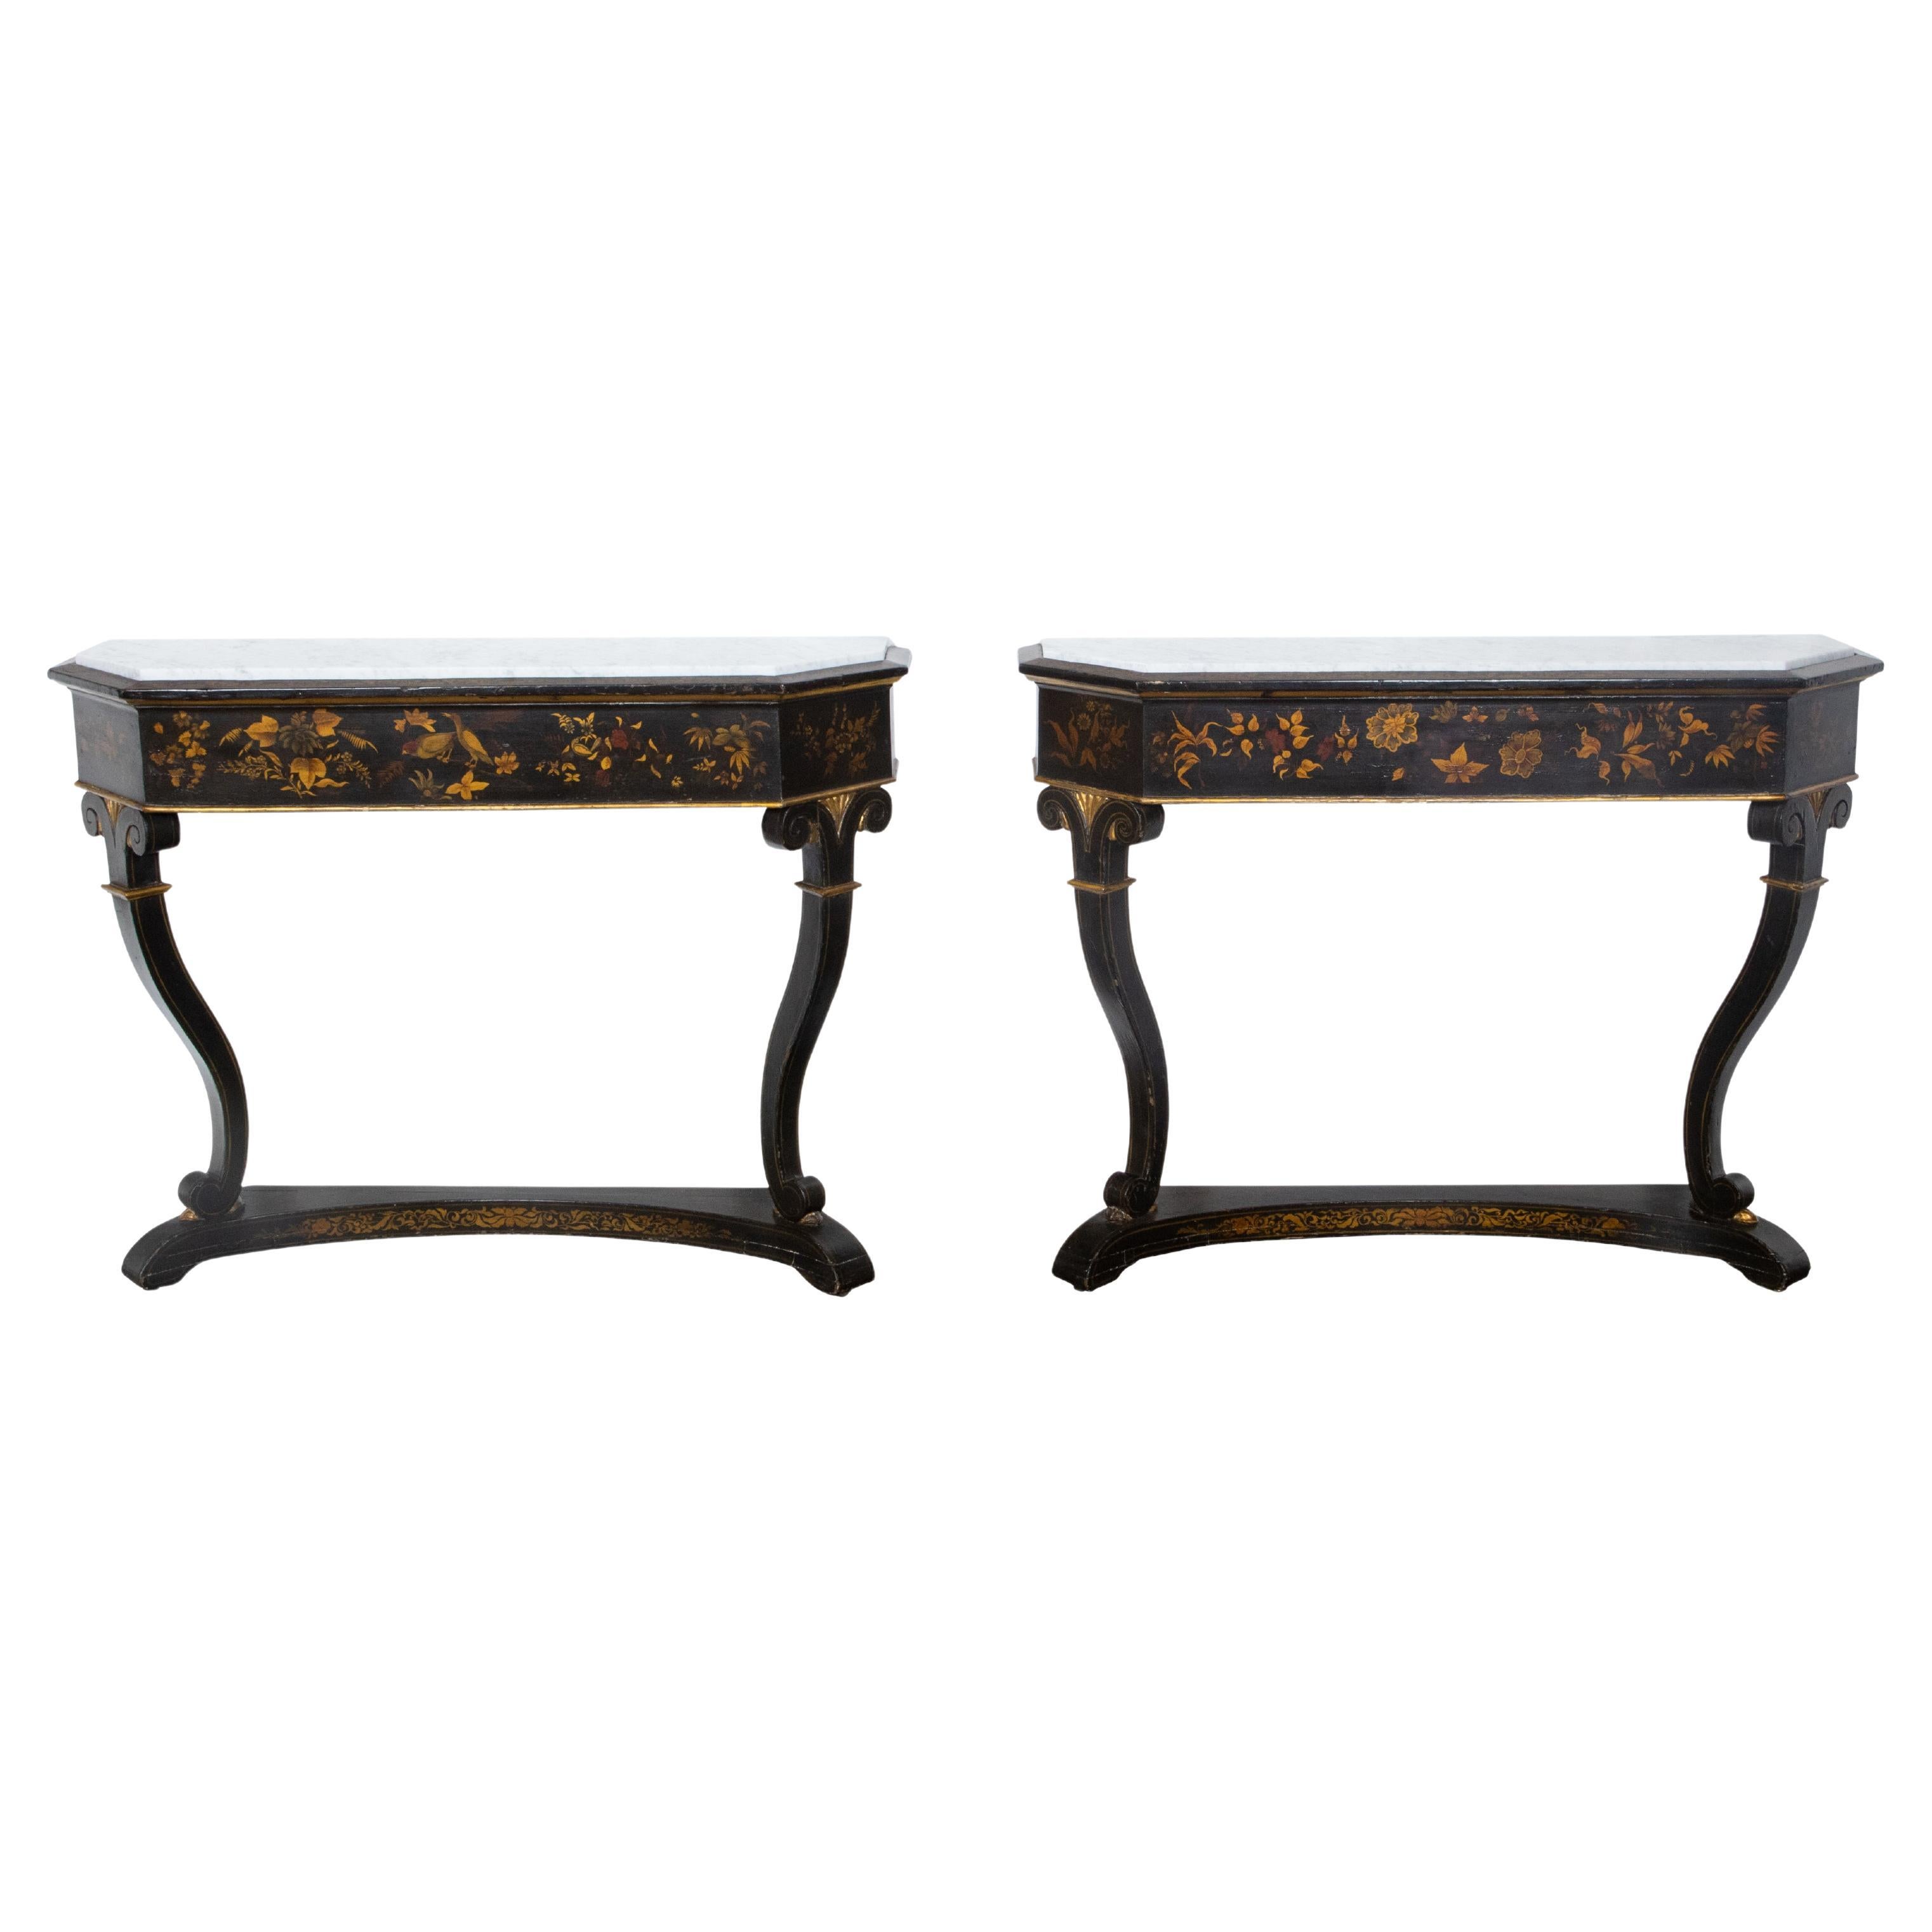 English Chinoiserie Black and Gold Console Tables with White Marble Tops, a Pair For Sale